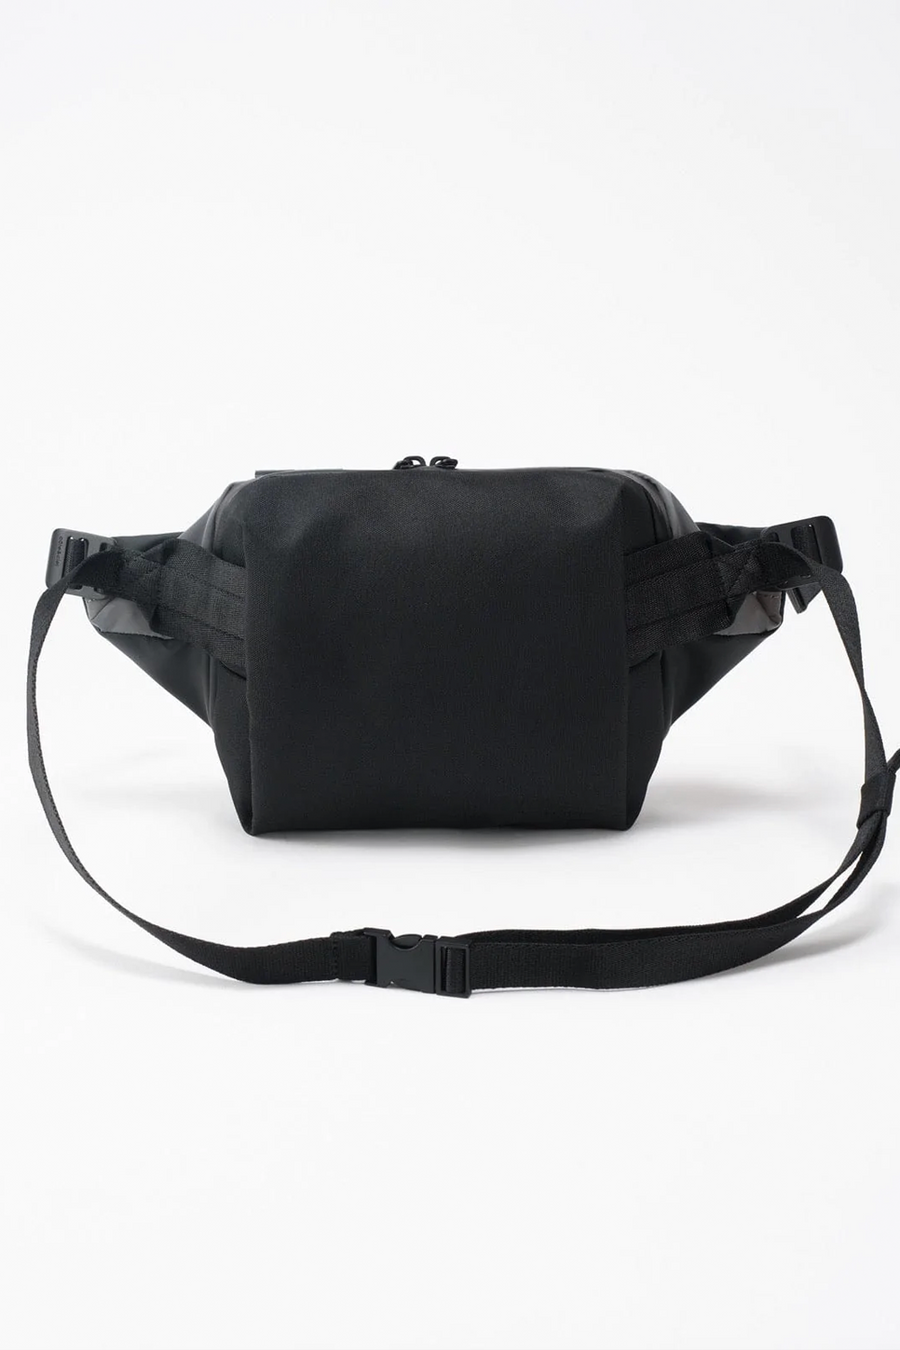 Buy the Cote & Ciel Isarau Cross Body Small Reflective in Black at Intro. Spend £50 for free UK delivery. Official stockists. We ship worldwide.